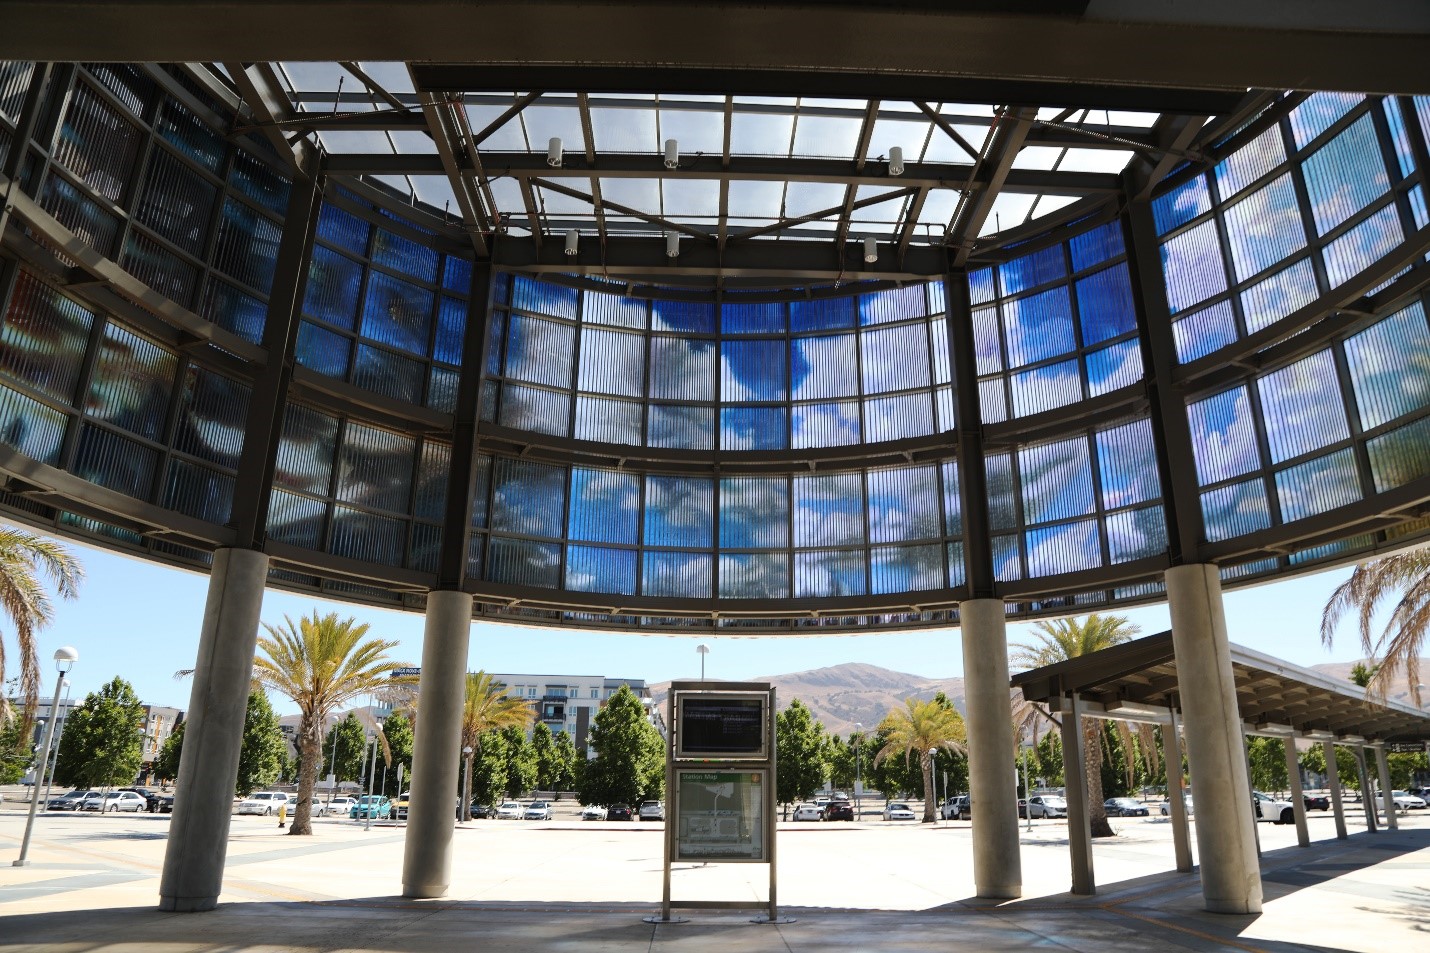  Art installation at Warm Springs/Fremont Station captures beauty of station’s surroundings 